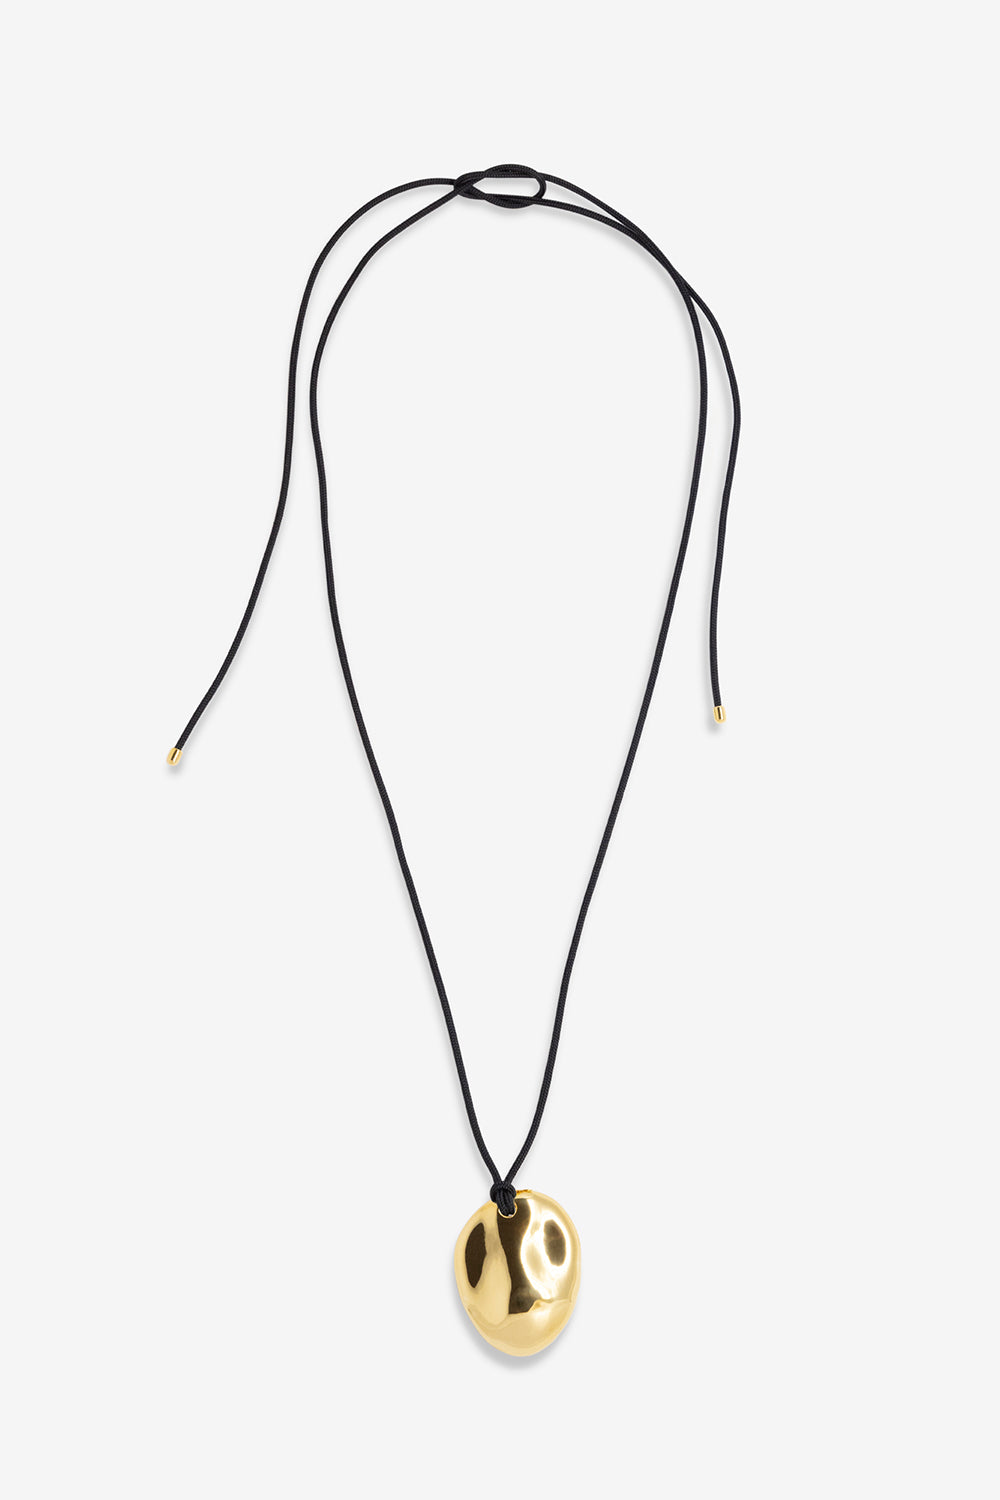 Flash Jewellery Dylan Dome Necklace with black cord in 14k Gold Vermeil